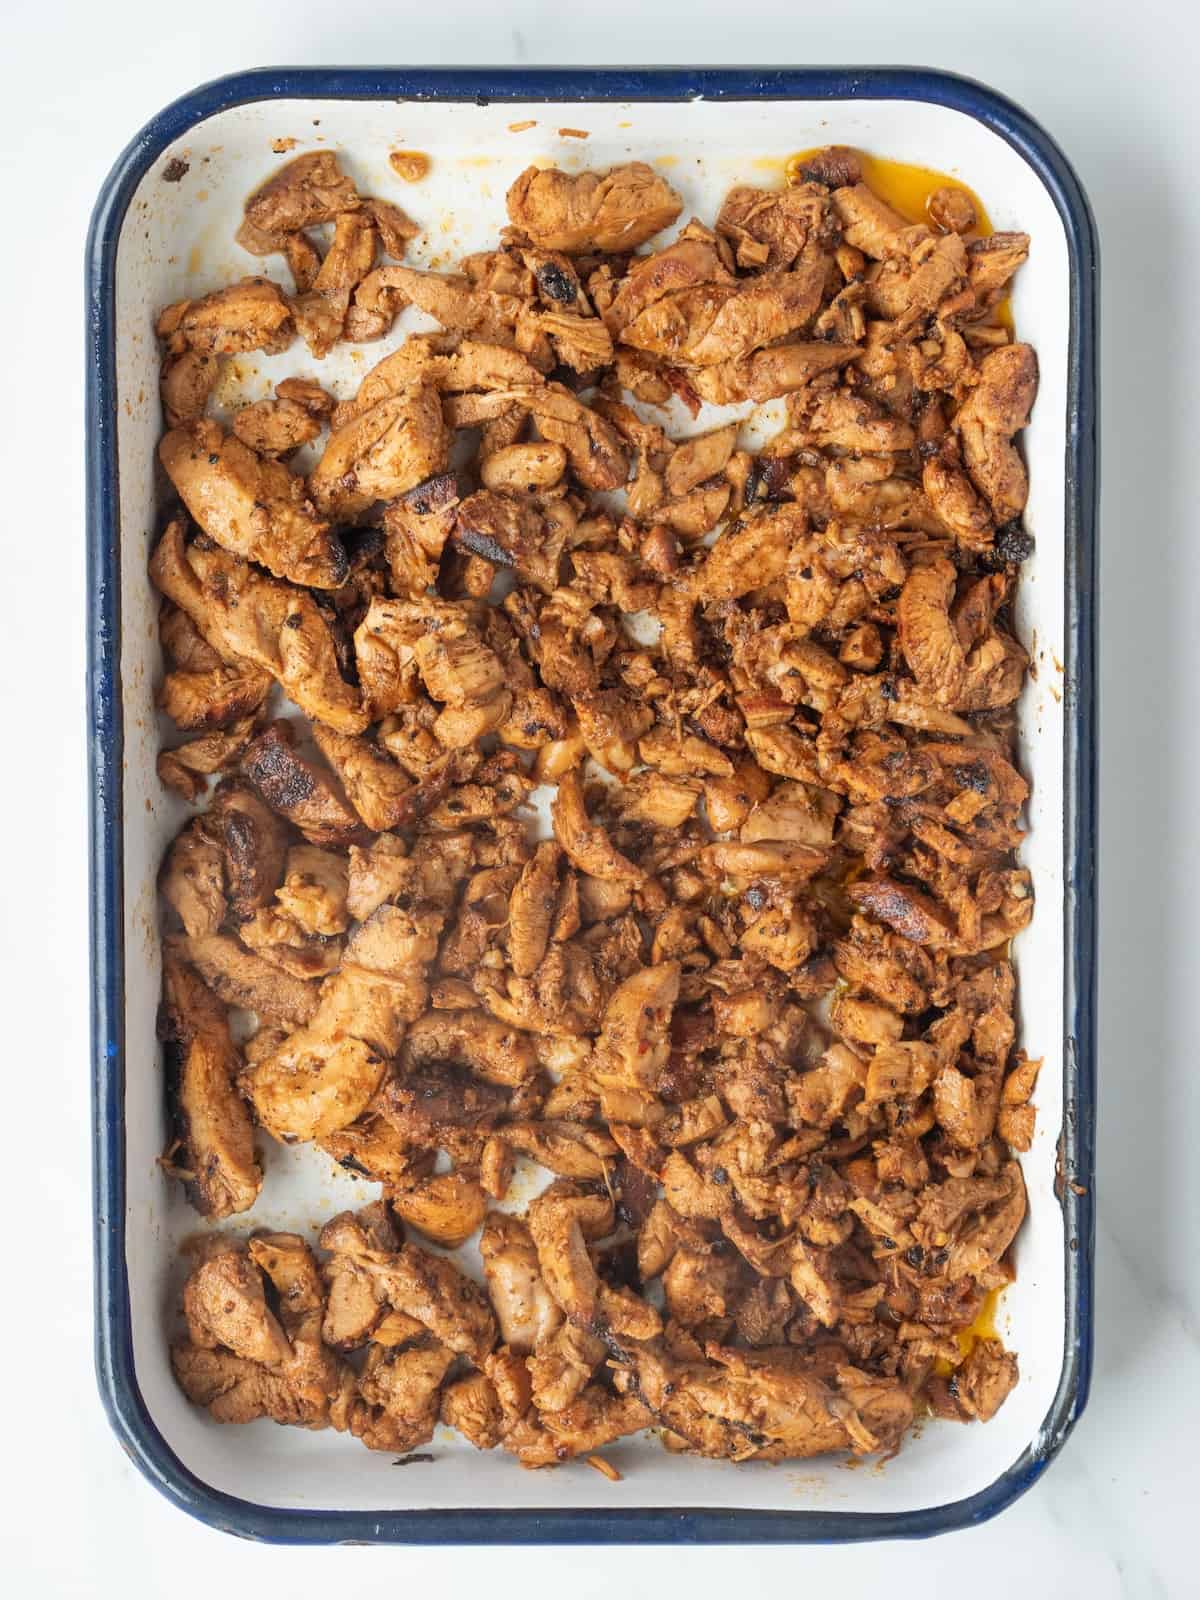 A rectangular dish with cooked chicken thighs sliced against the grain into thin strips and crisped on edges by sautéeing in the skillet for a couple minutes.